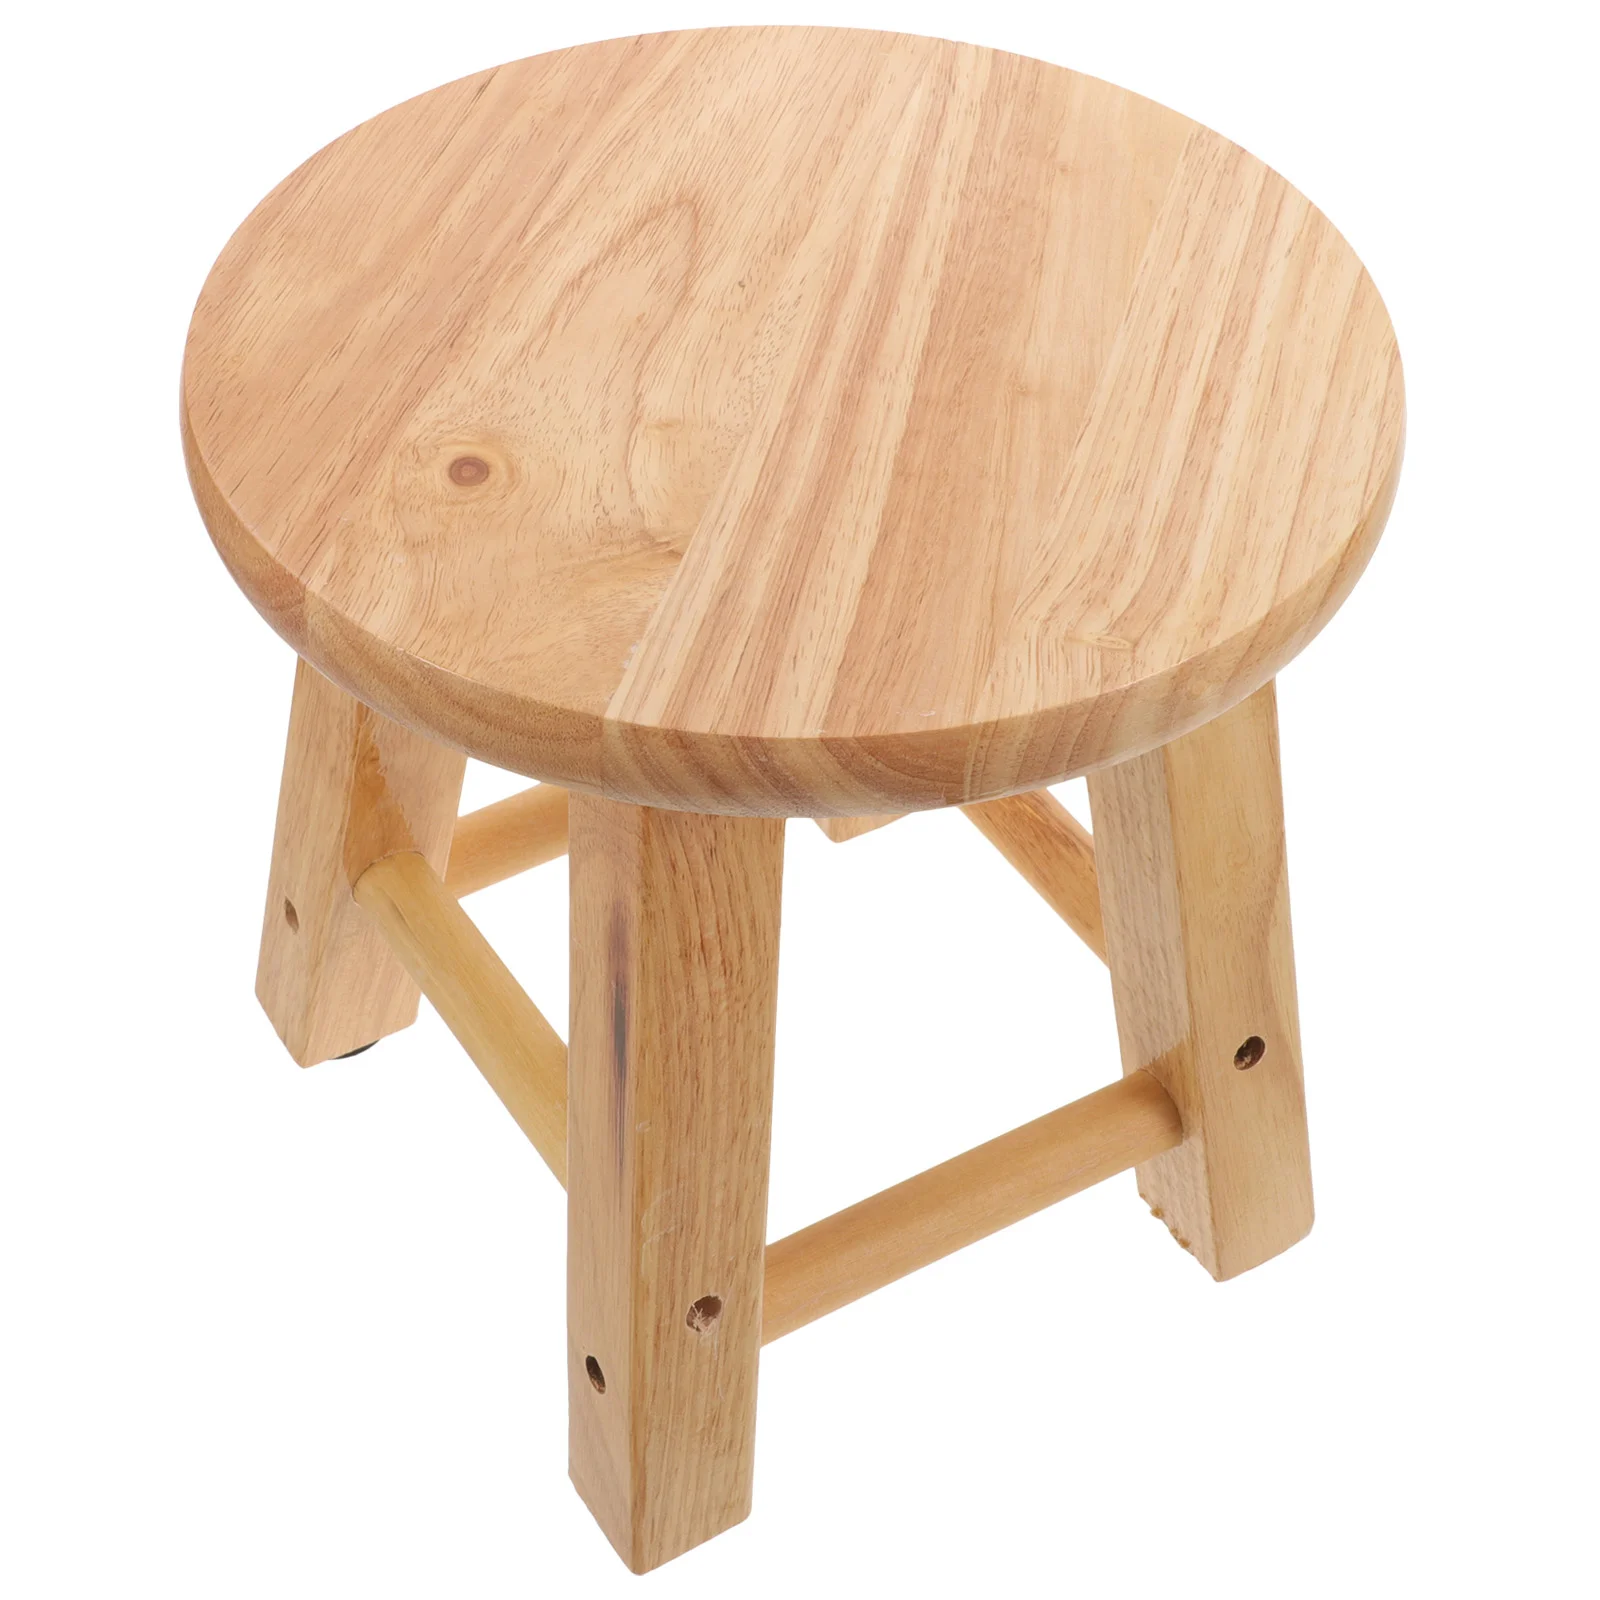 

Kids Stool Milking Stool 25Cm Plant Stand Round Step Stool Wooden Stool Kids Small Short Stool Shoe Changing Stool